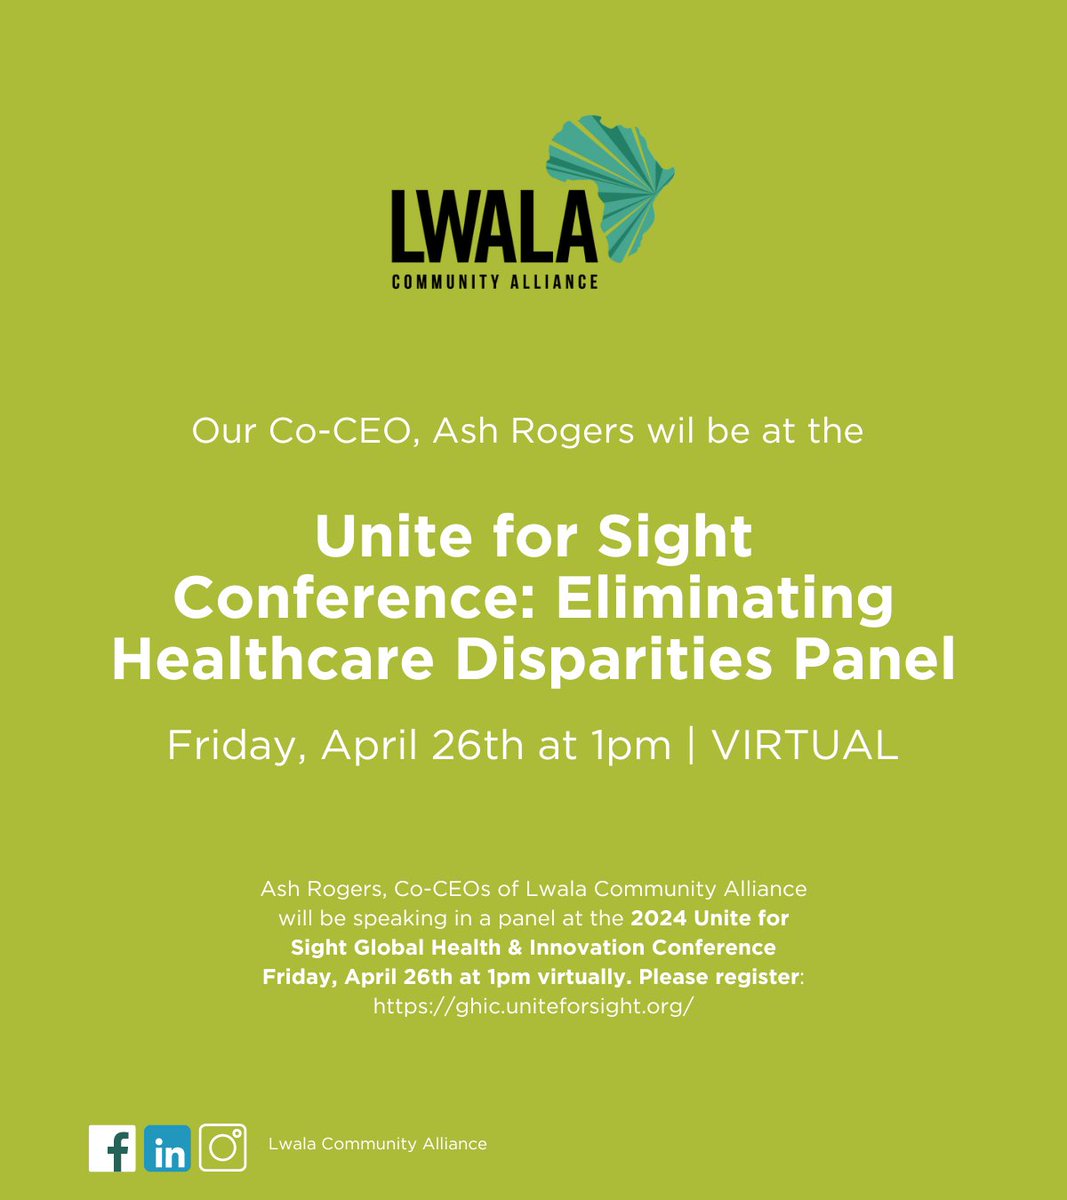 Coming up at the @uniteforsight Conference: our Co-CEO @AshRogers1734 joins partners from @DtreeInt , @Fistula_Fdtn, @AriadneLabs, @harvardmed in a panel focused on eliminating disparities in global health. Friday, April 26th at 1pm. Register here: ghic.uniteforsight.org/schedule